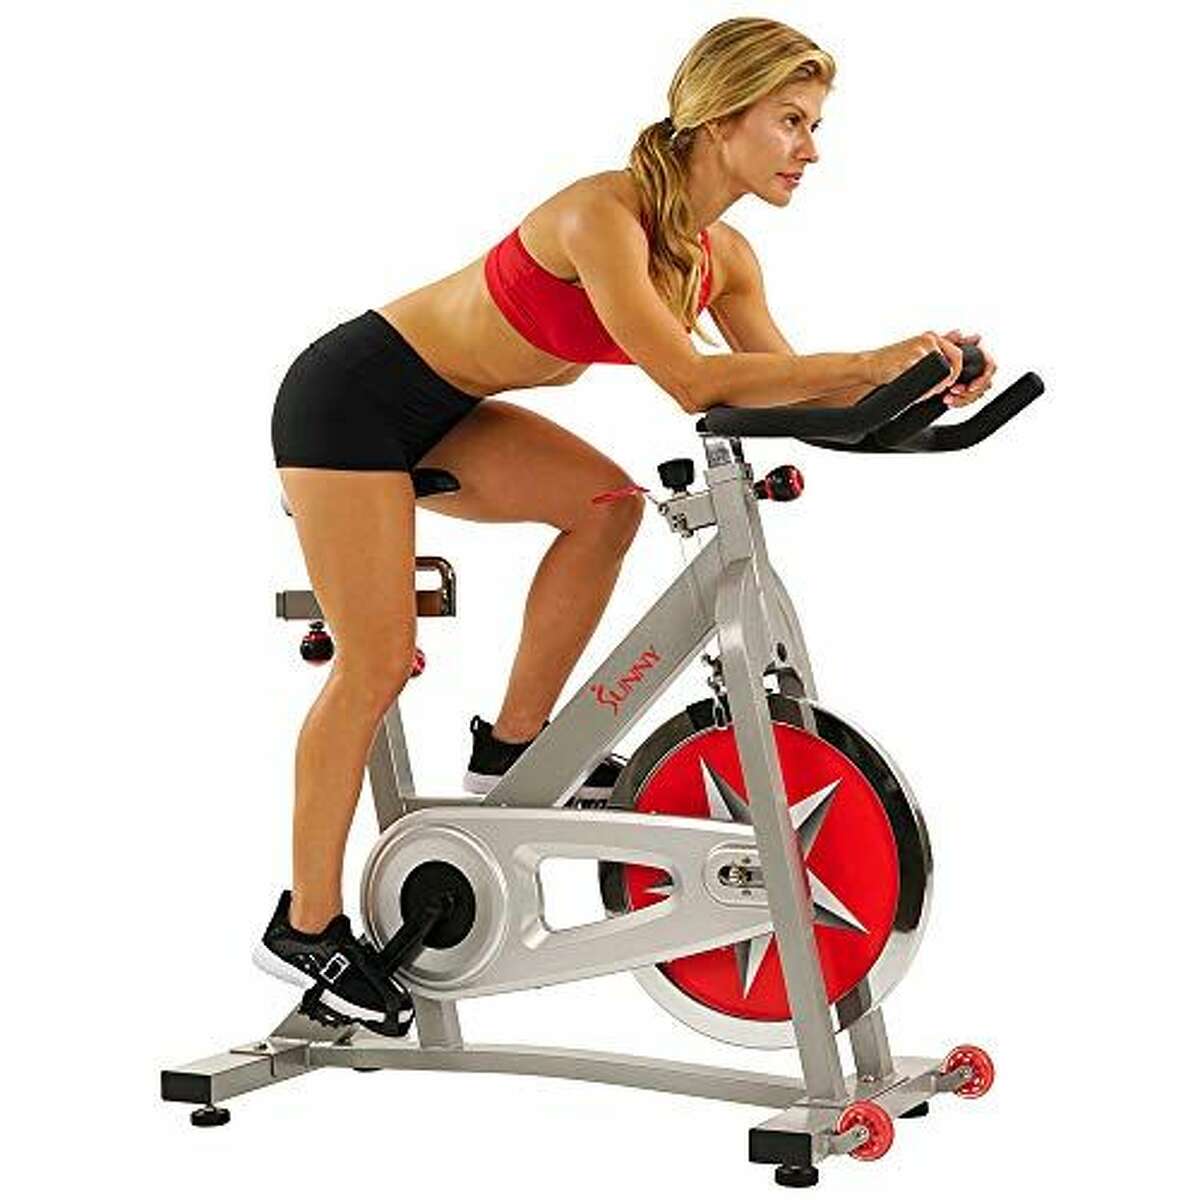 2) Sunny Health & Fitness Pro Indoor Cycling Bike: $299.99 CHECK PRICE This no-frills bike might not have all the bells and whistles of other models, but it'll get the job done—for less than $350. Use it with your favorite app or on its own for an endorphins boost and a great sweat sesh.